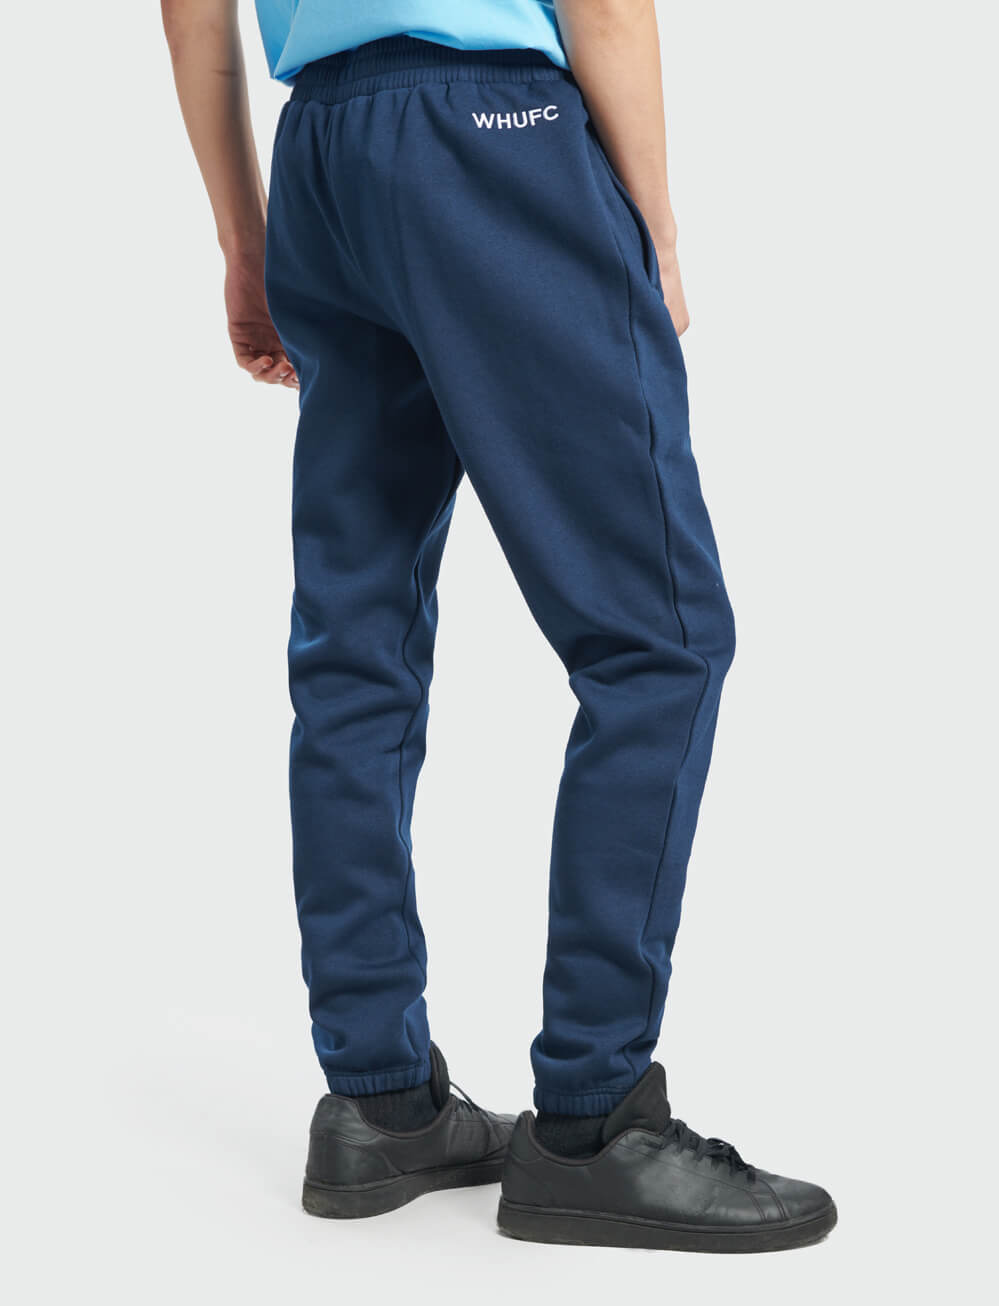 Official West Ham United Joggers - Navy - The World Football Store